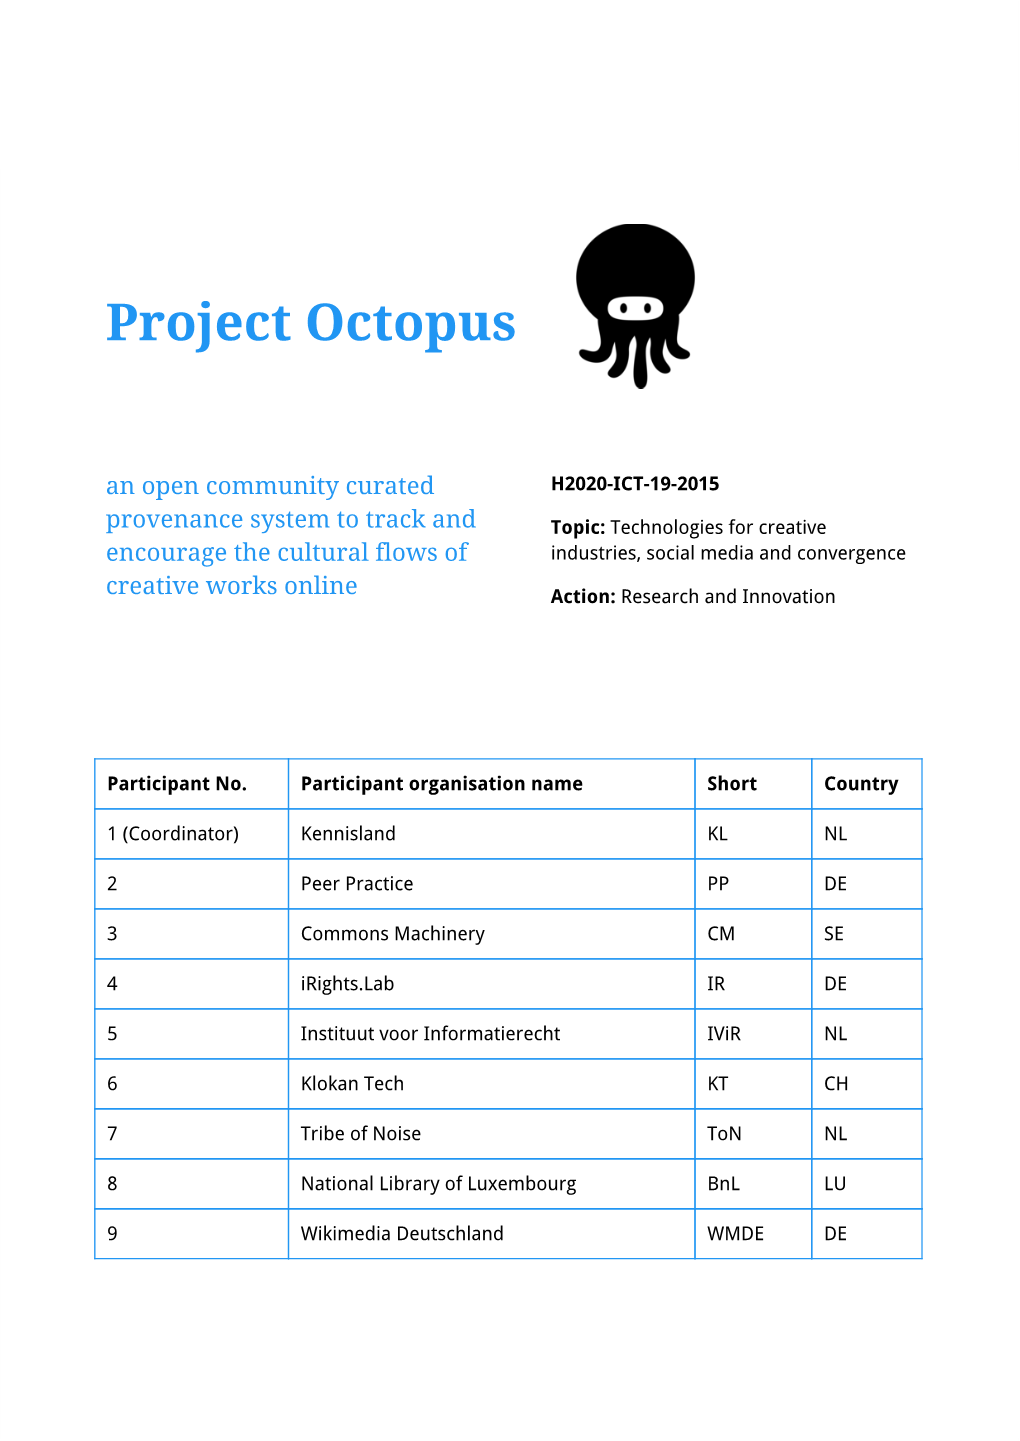 Project Octopus